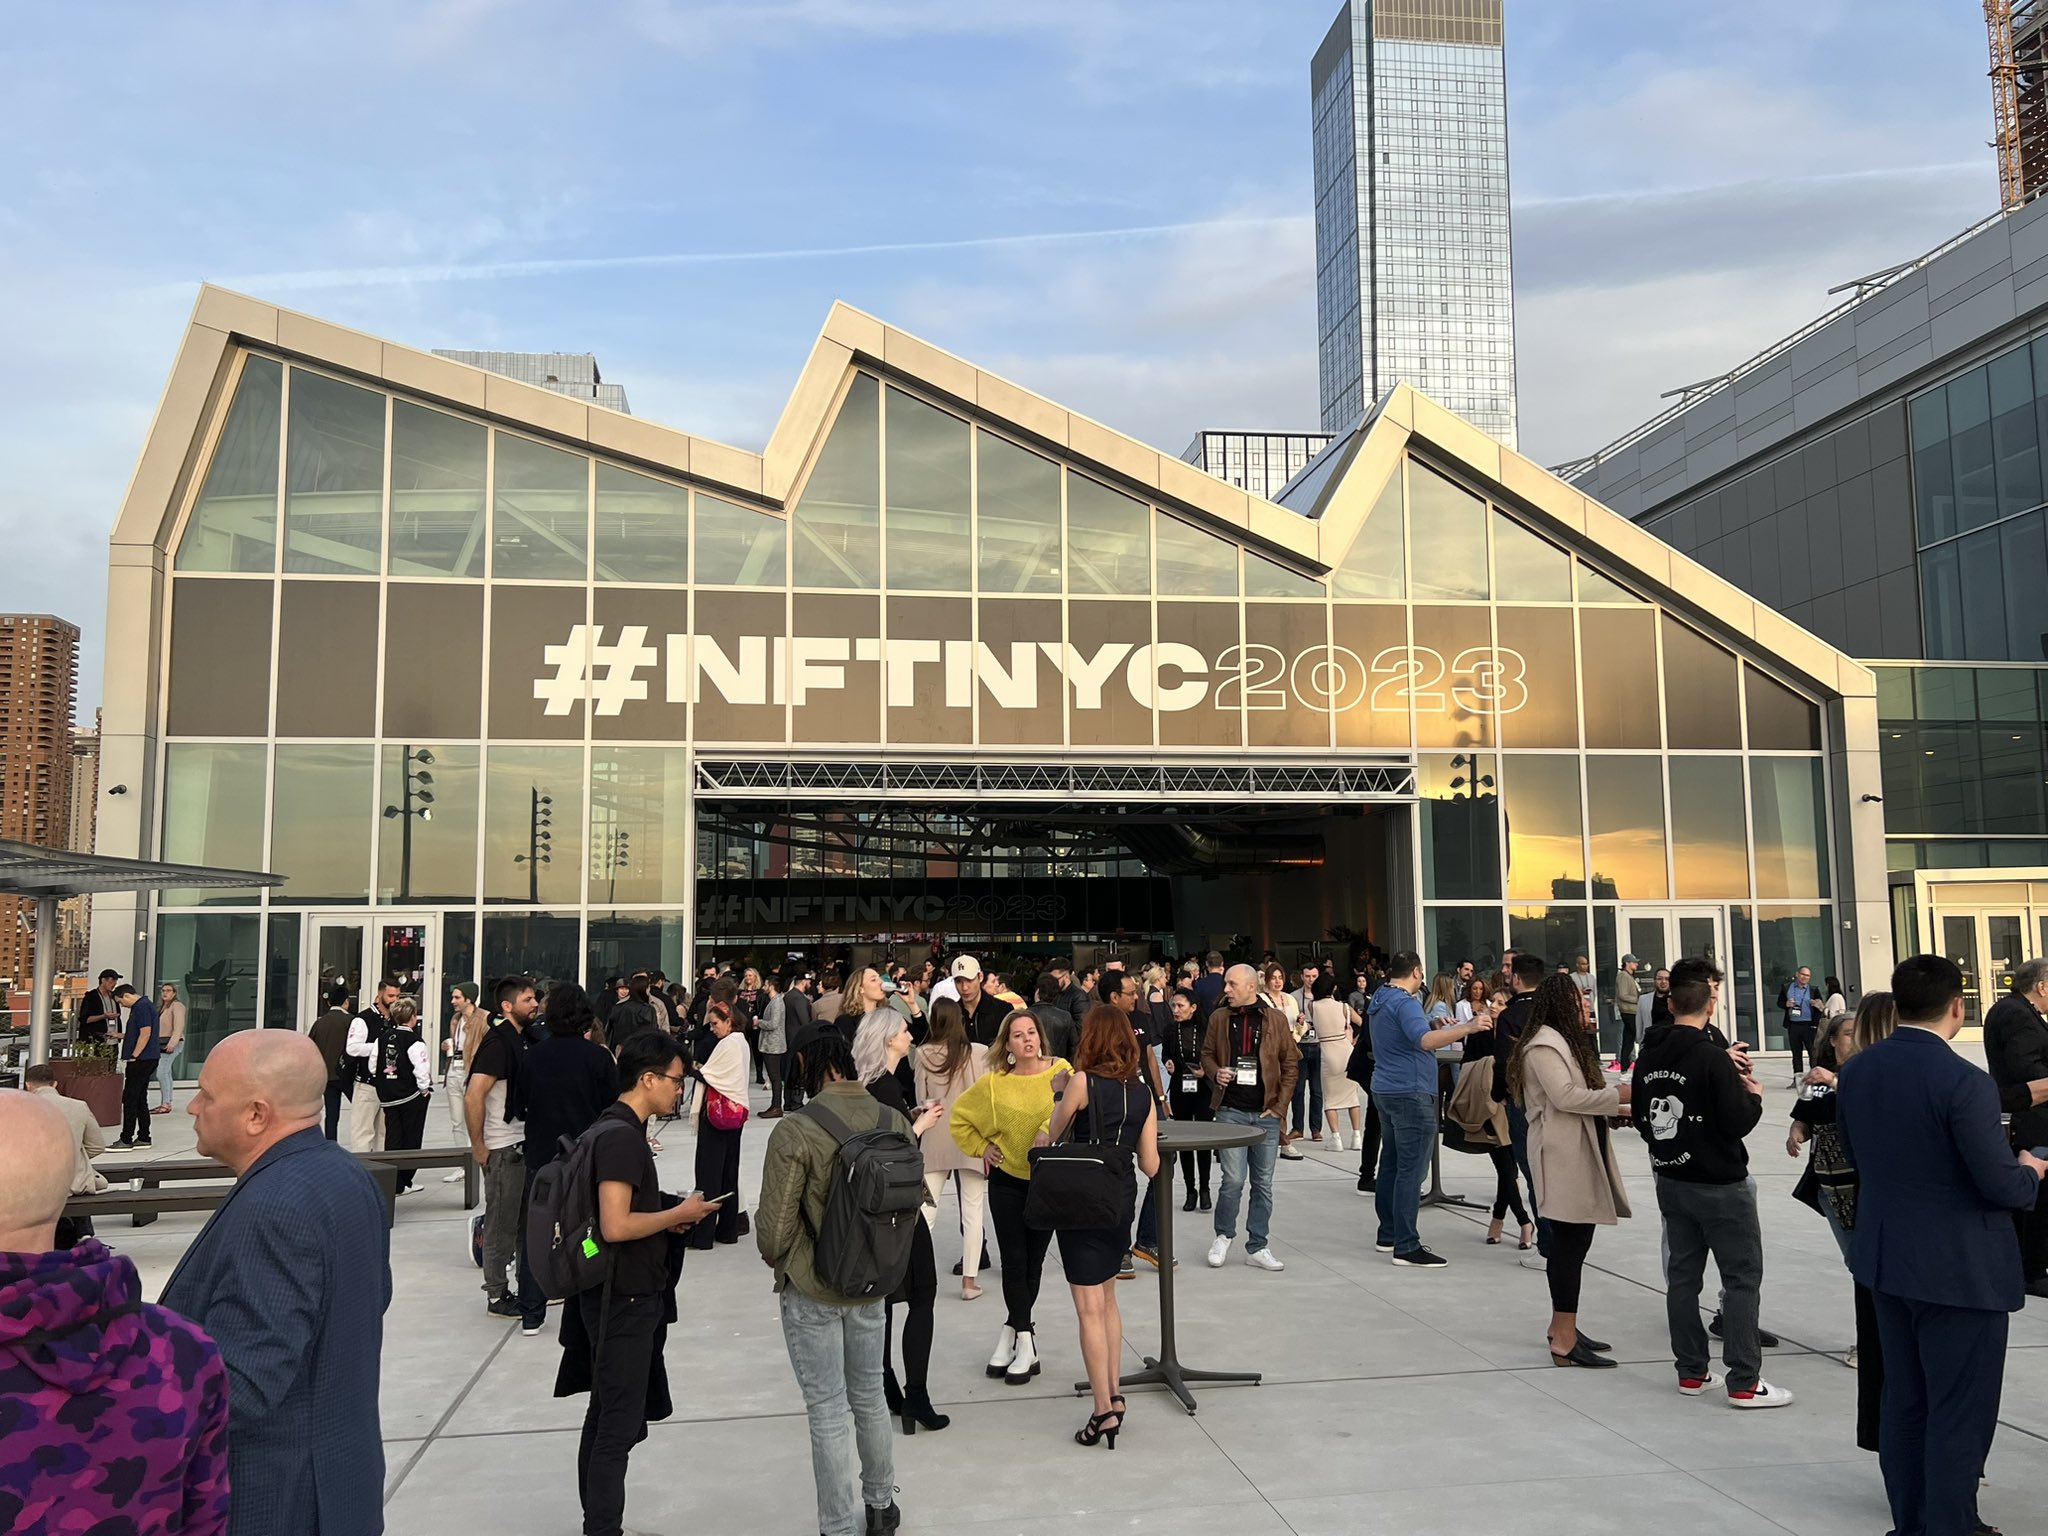 NFTNYC: As the New York crypto community brace for NFT NYC 2024, unpack the hype with 99Bitcoin's guide to NFT NYC dates and tickets.